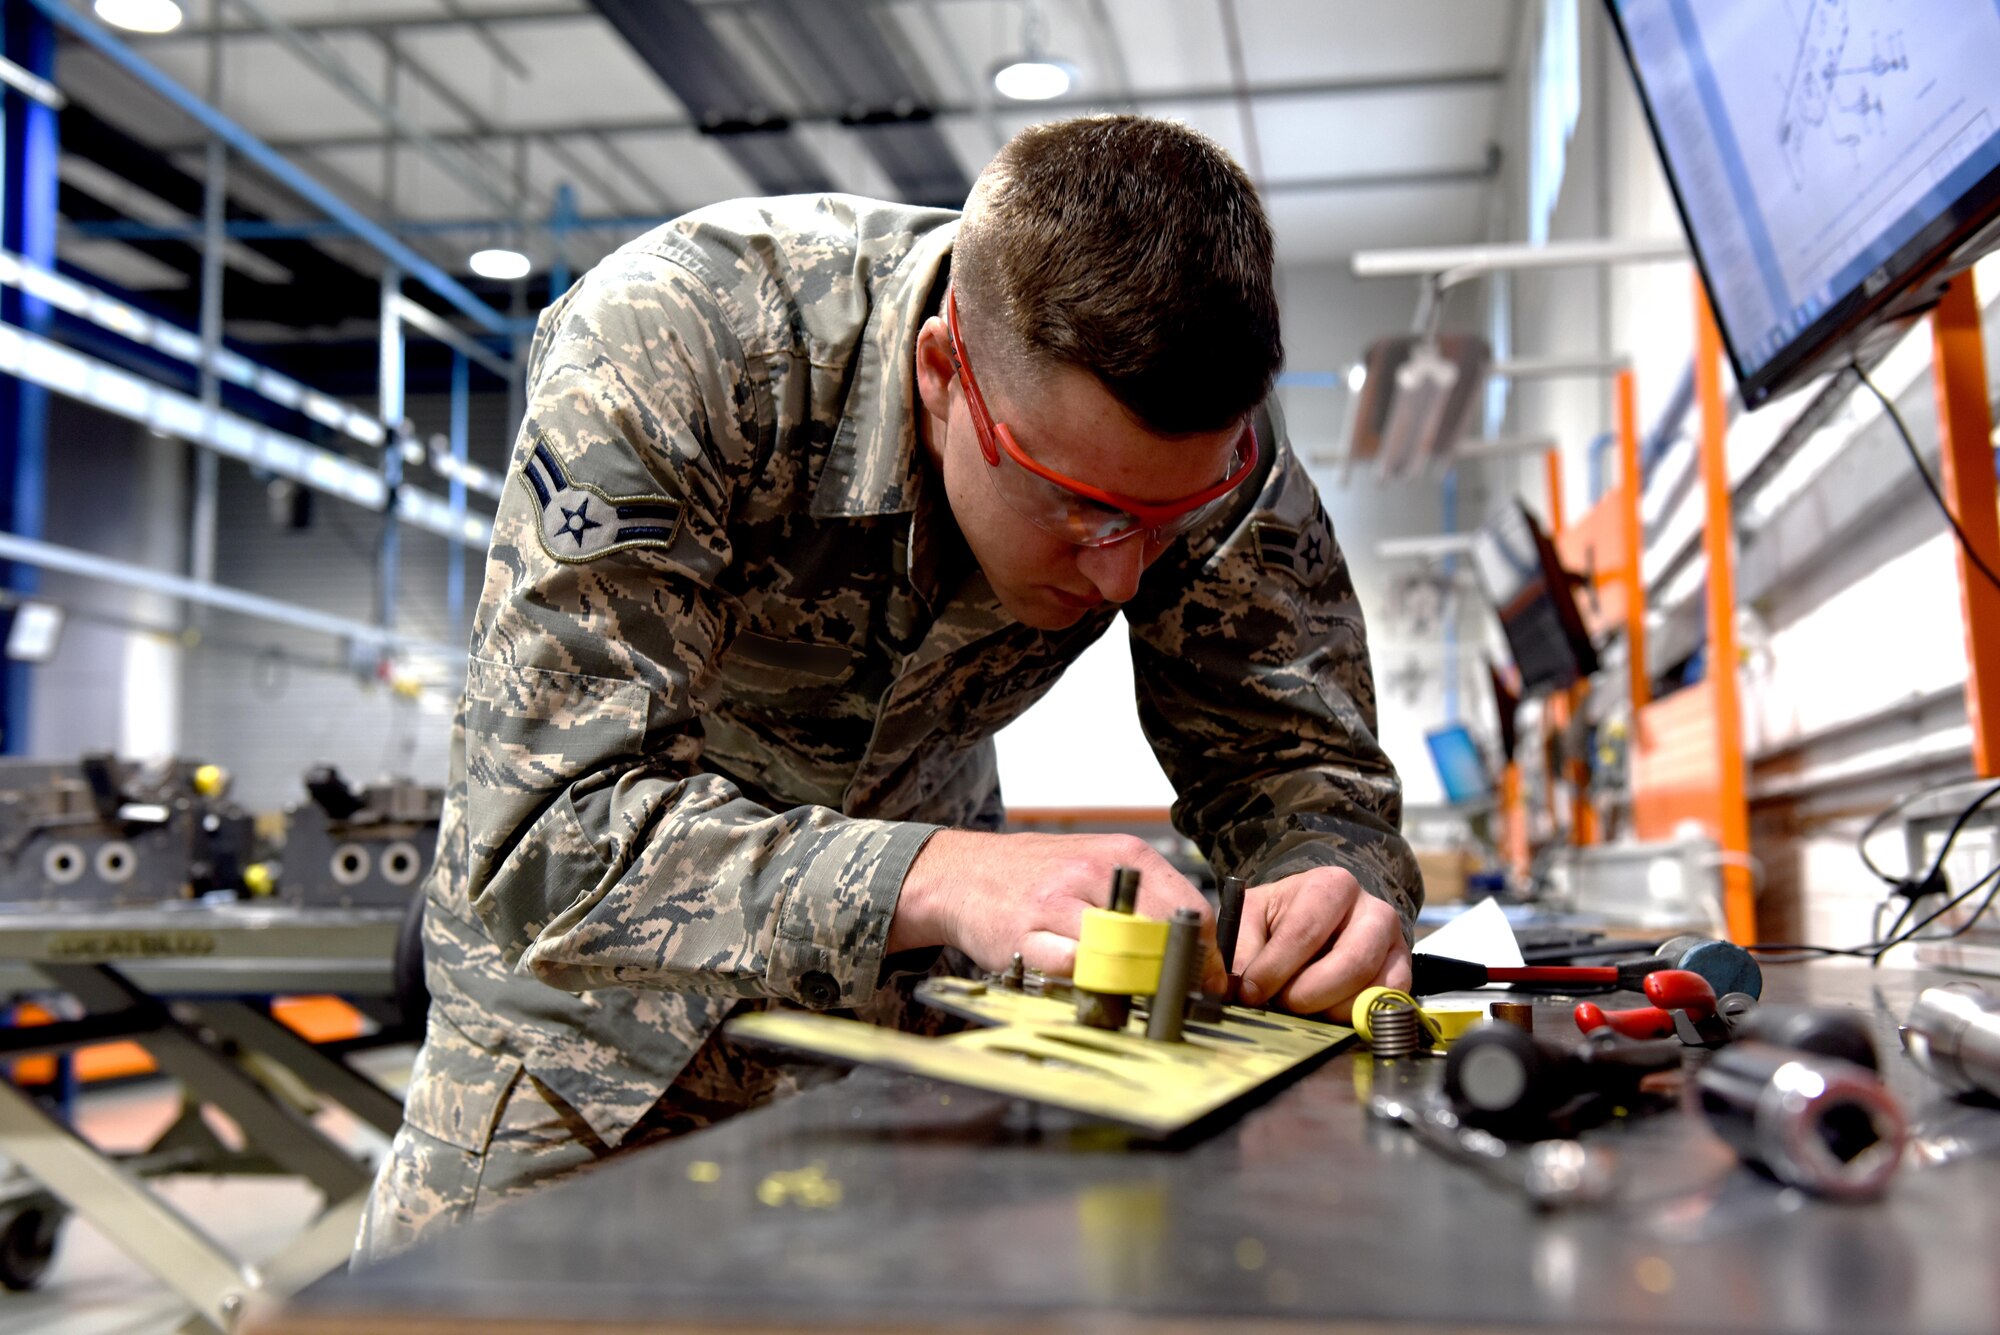 An aircraft armament specialist from the 48th Munitions Squadron repairs an interface panel at Royal Air Force Lakenheath, England, June 13. Aircraft armament specialists perform functional checks of launch and suspension systems. (U.S. Air Force photo/Airman 1st Class John A. Crawford)